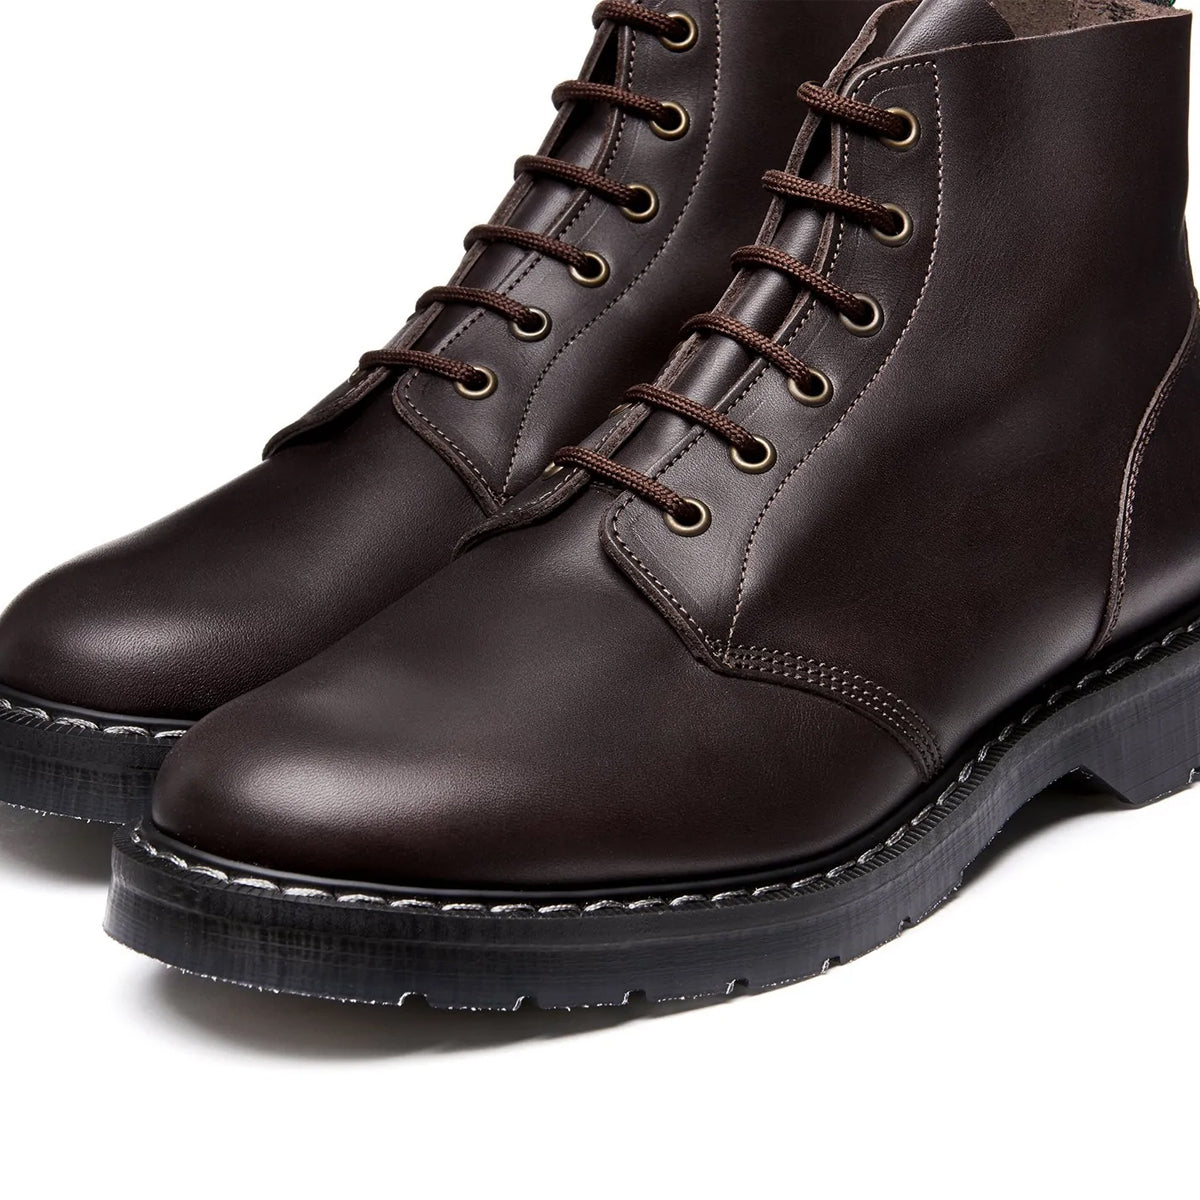 6-Eye Astronaut Boot DARK BROWN WAXY

Made in England
Over 140 years of Traditional Shoemaking Craftsmanship
Goodyear Welted Construction
Dark Brown Waxy Leather Upper
Leather &amp;amp; Synthetic Lining
Soft Suspension Classic Sole
 SOLOVAIR